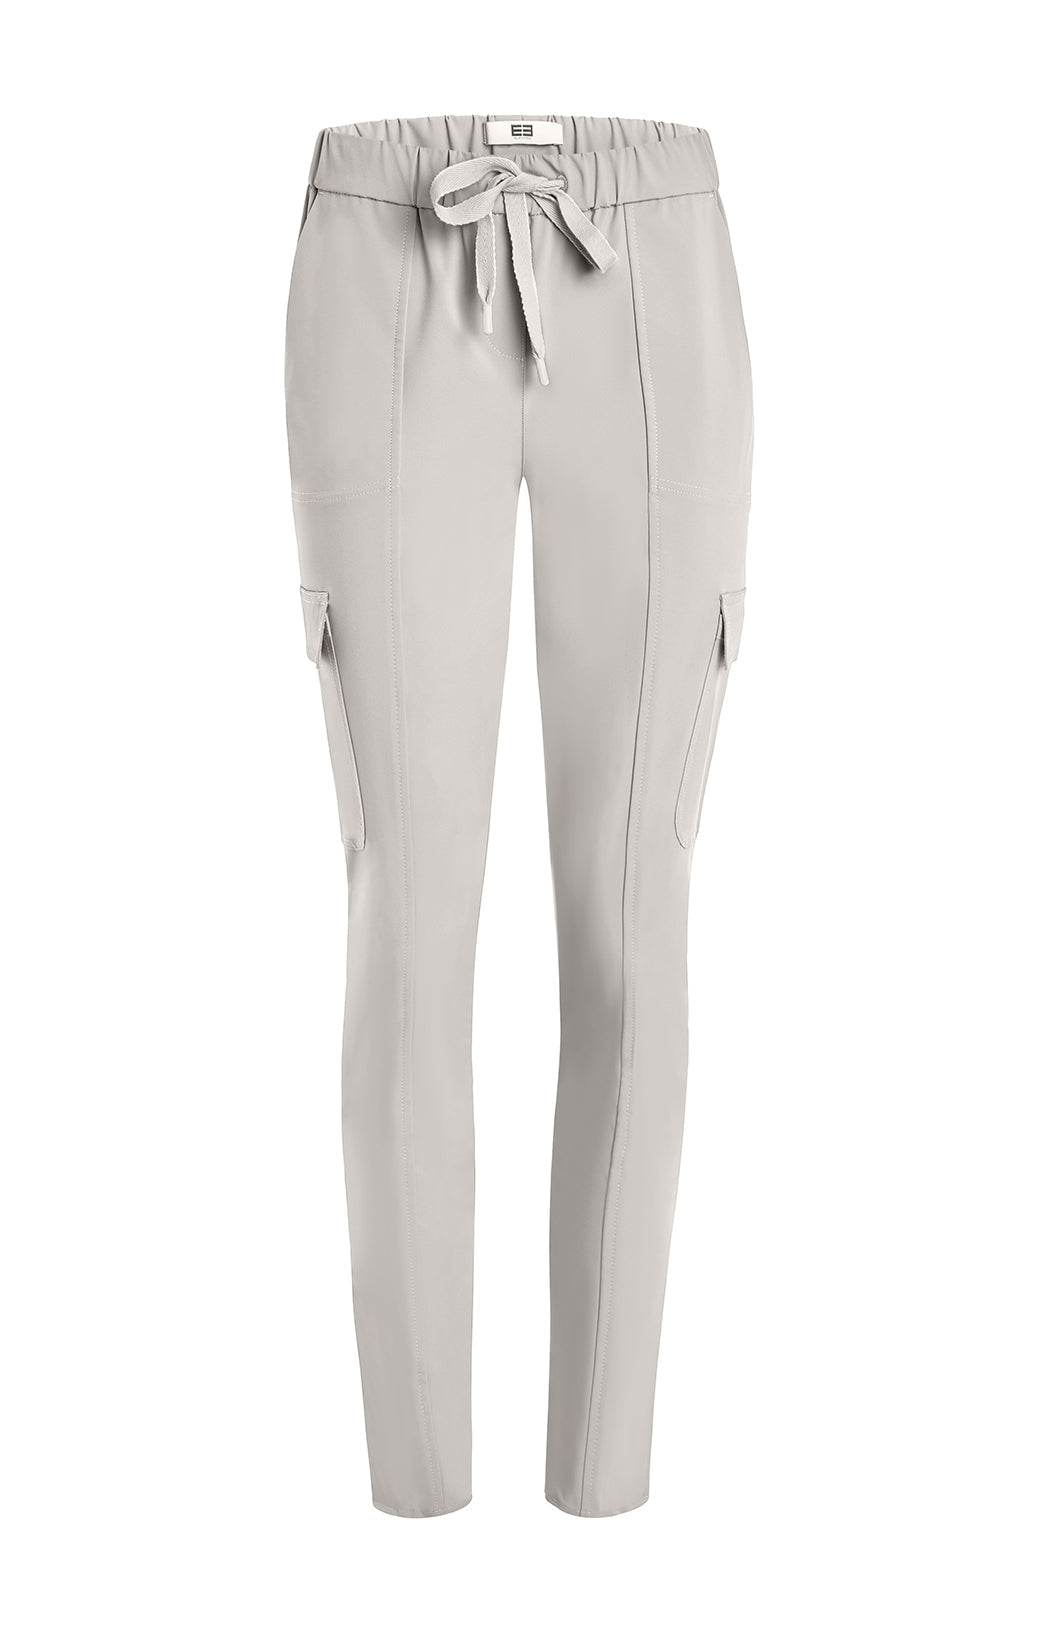 Baskerville - White Trousers In Stretch Houndstooth Jacquard - Product Image